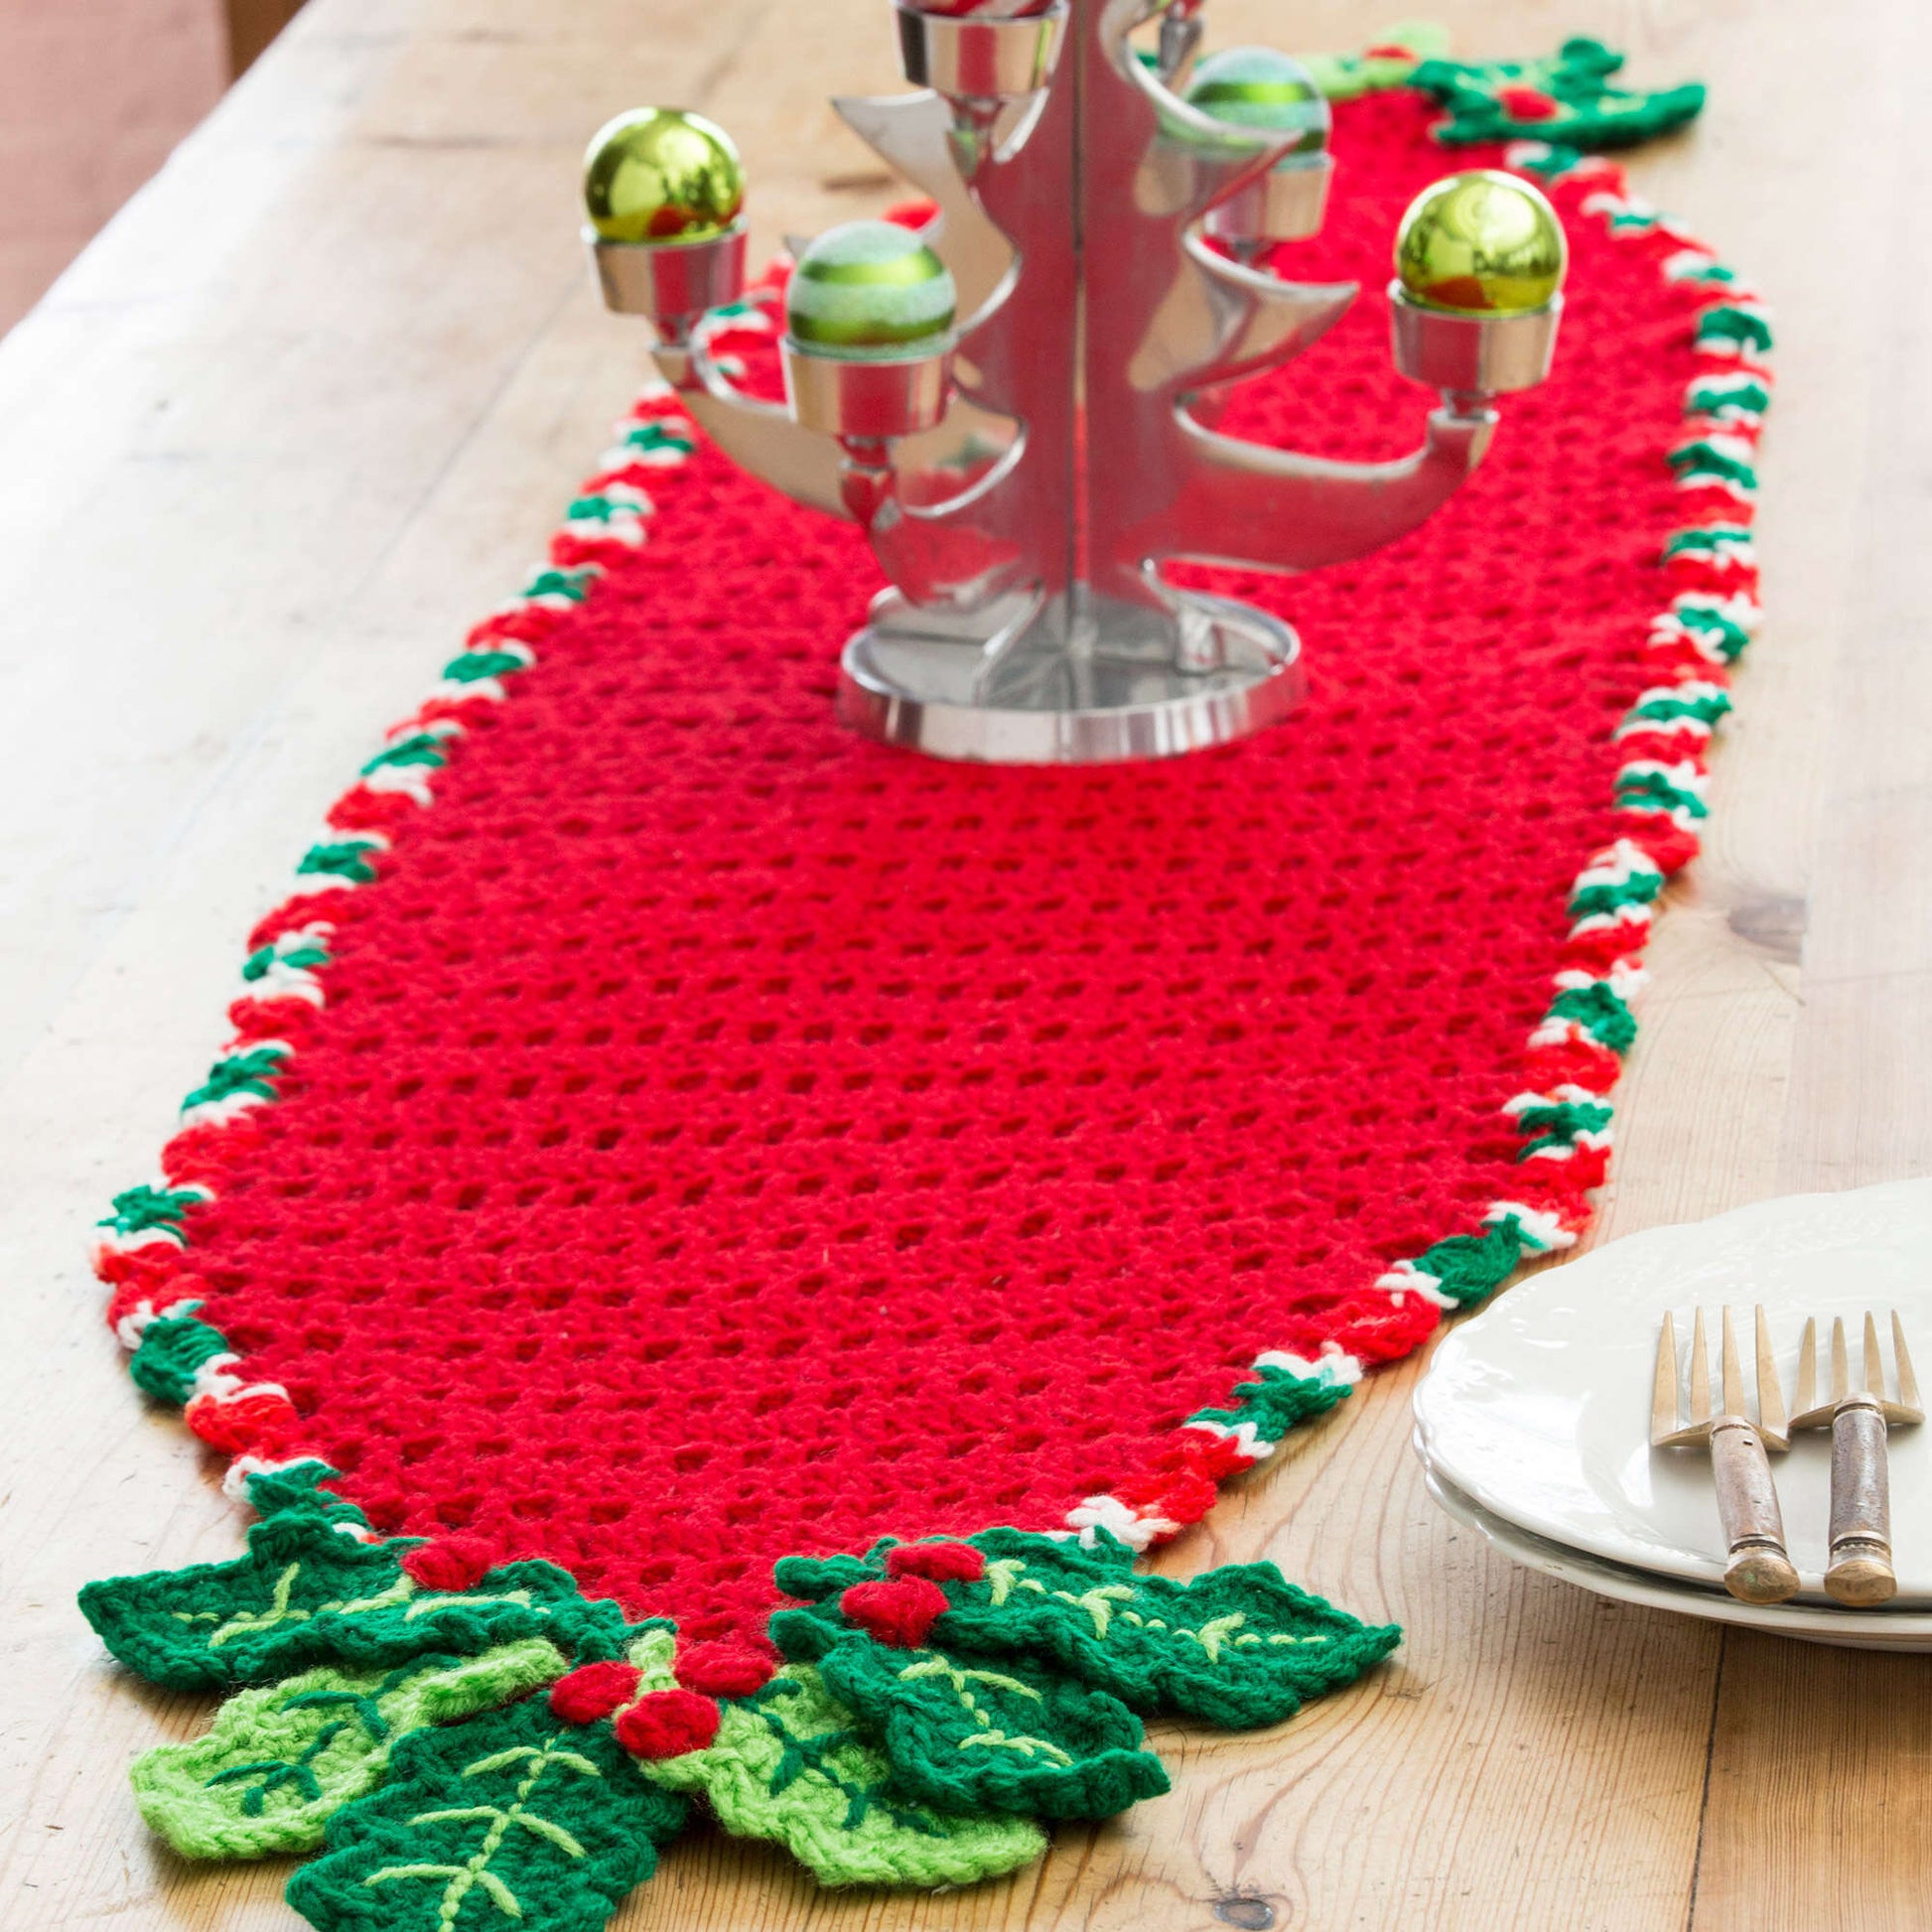 Free Red Heart Holly Trim Table Runner Pattern